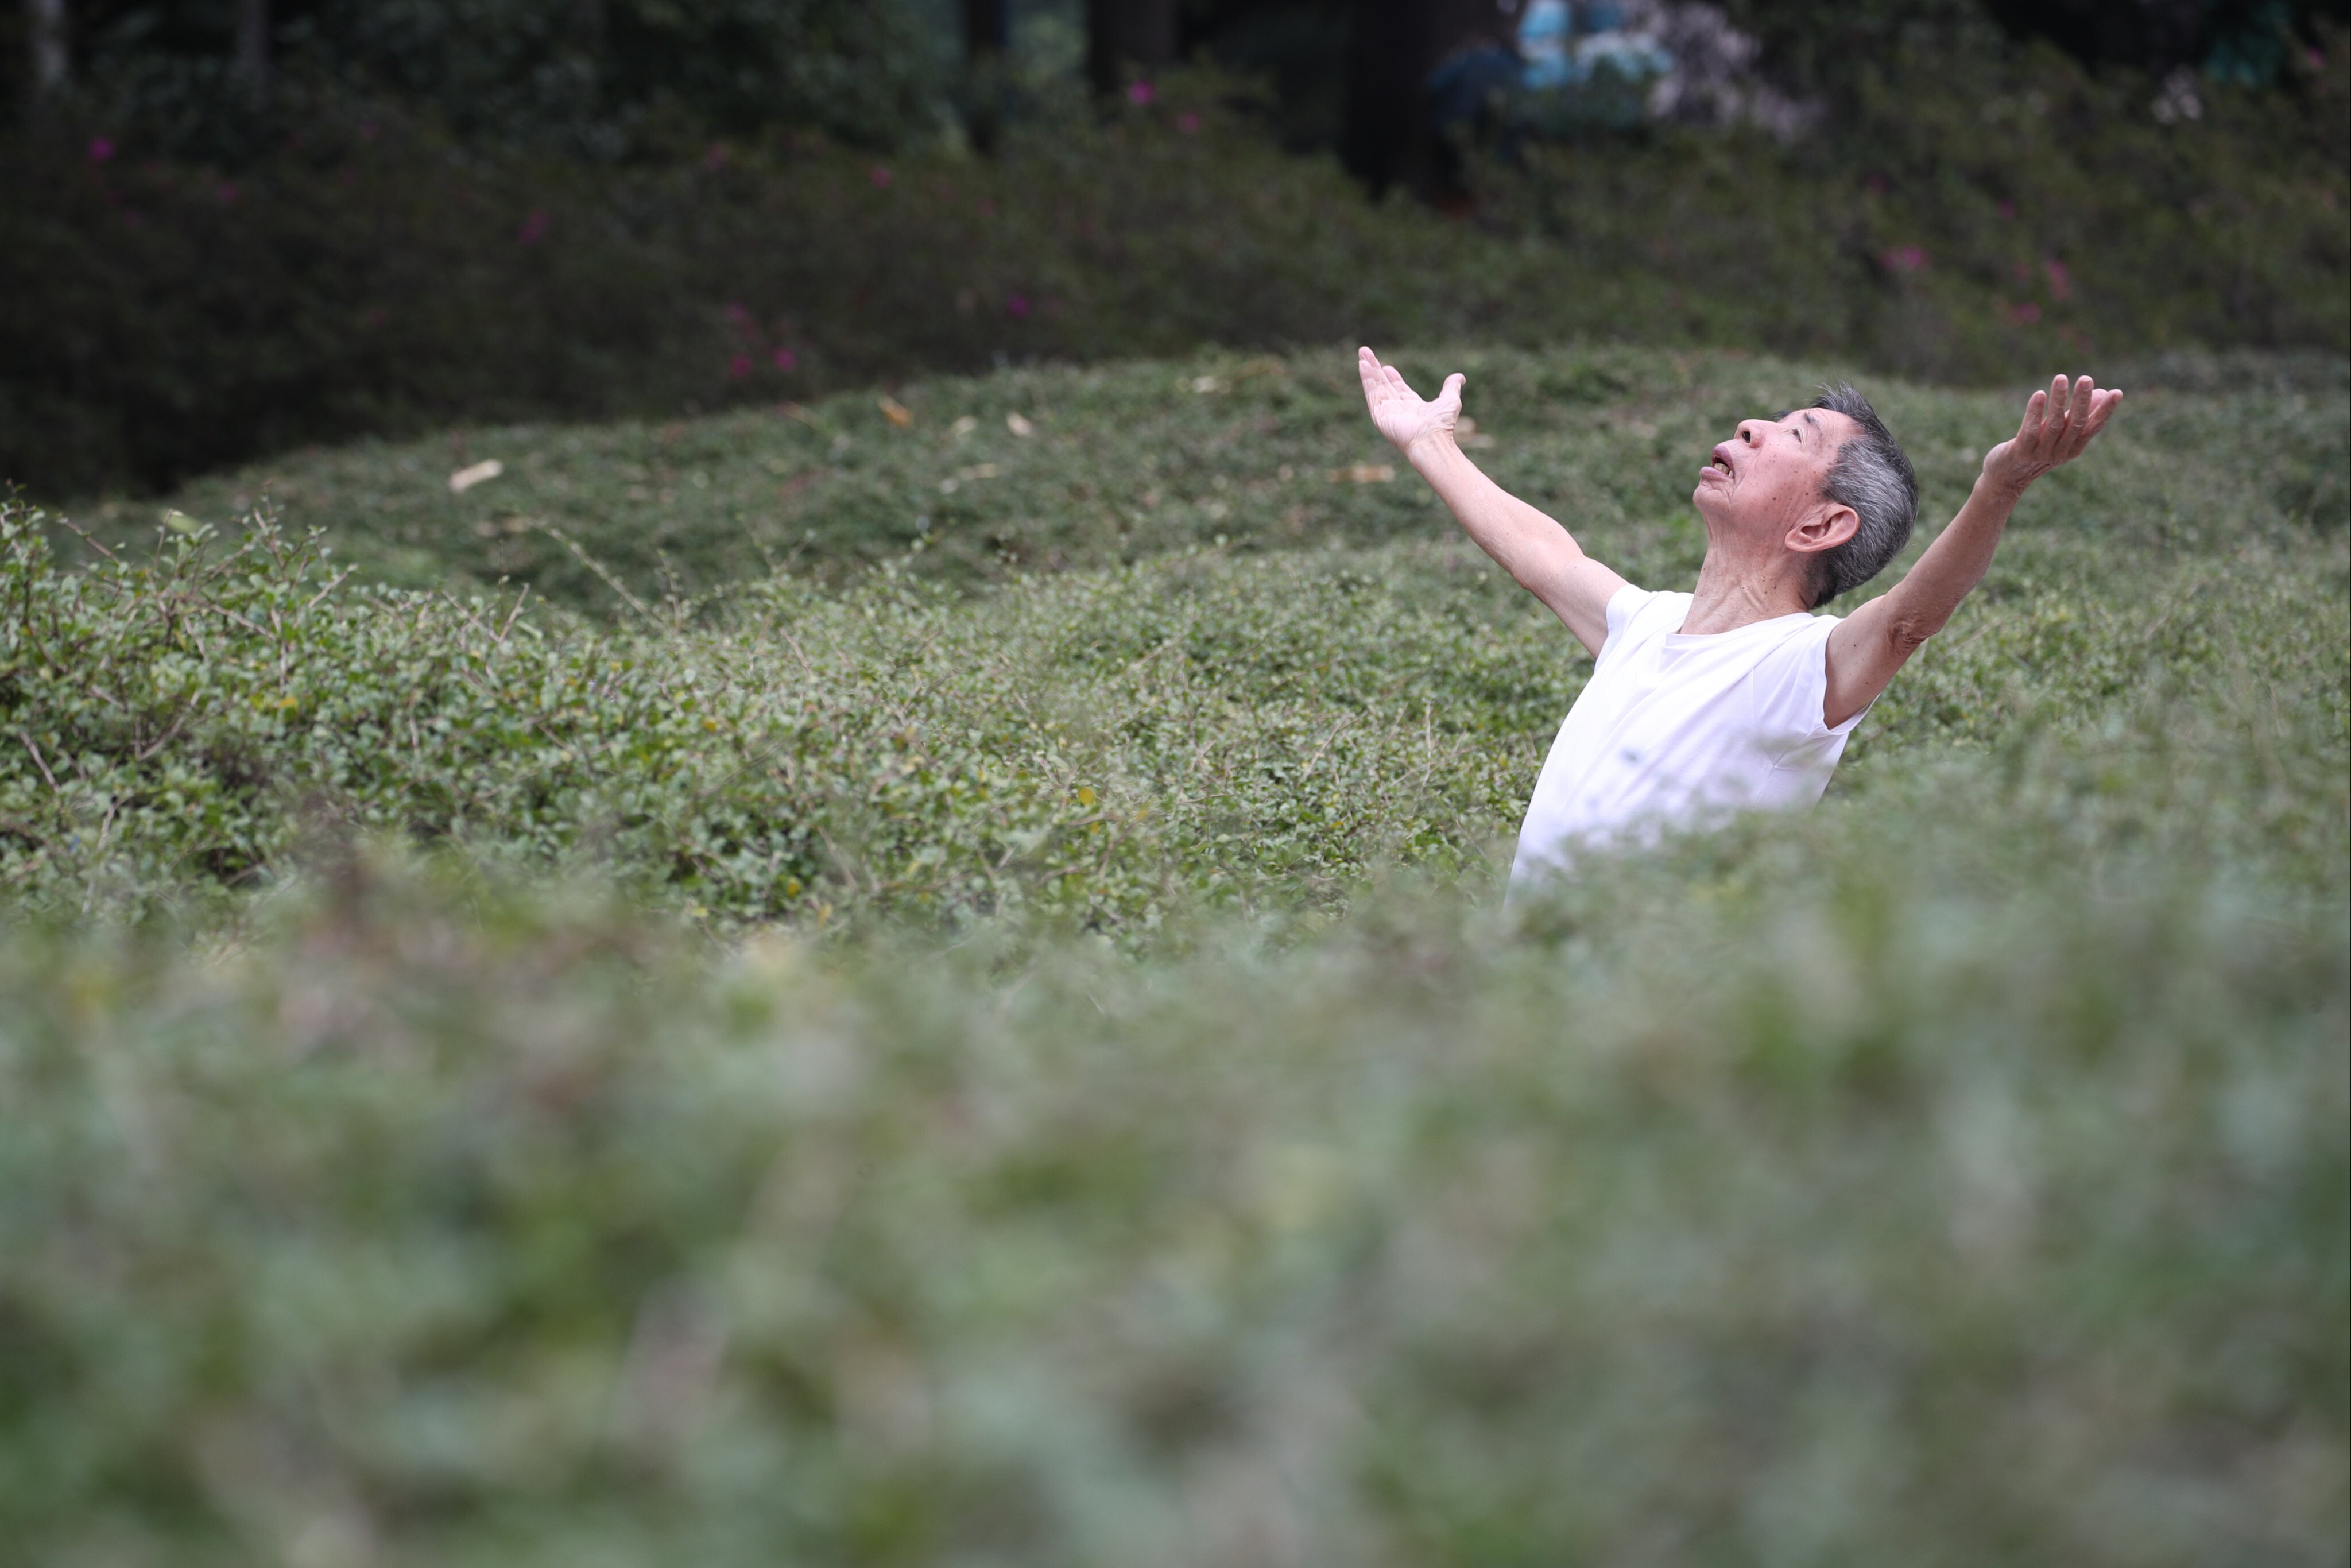 An elderly man exercises in Kowloon Park in Tsim Sha Tsui on January 1. The government’s Covid-19 policy means Hongkongers are missing out on opportunities to exercise and socialise, and might start to feel their age. Photo: Edmond So